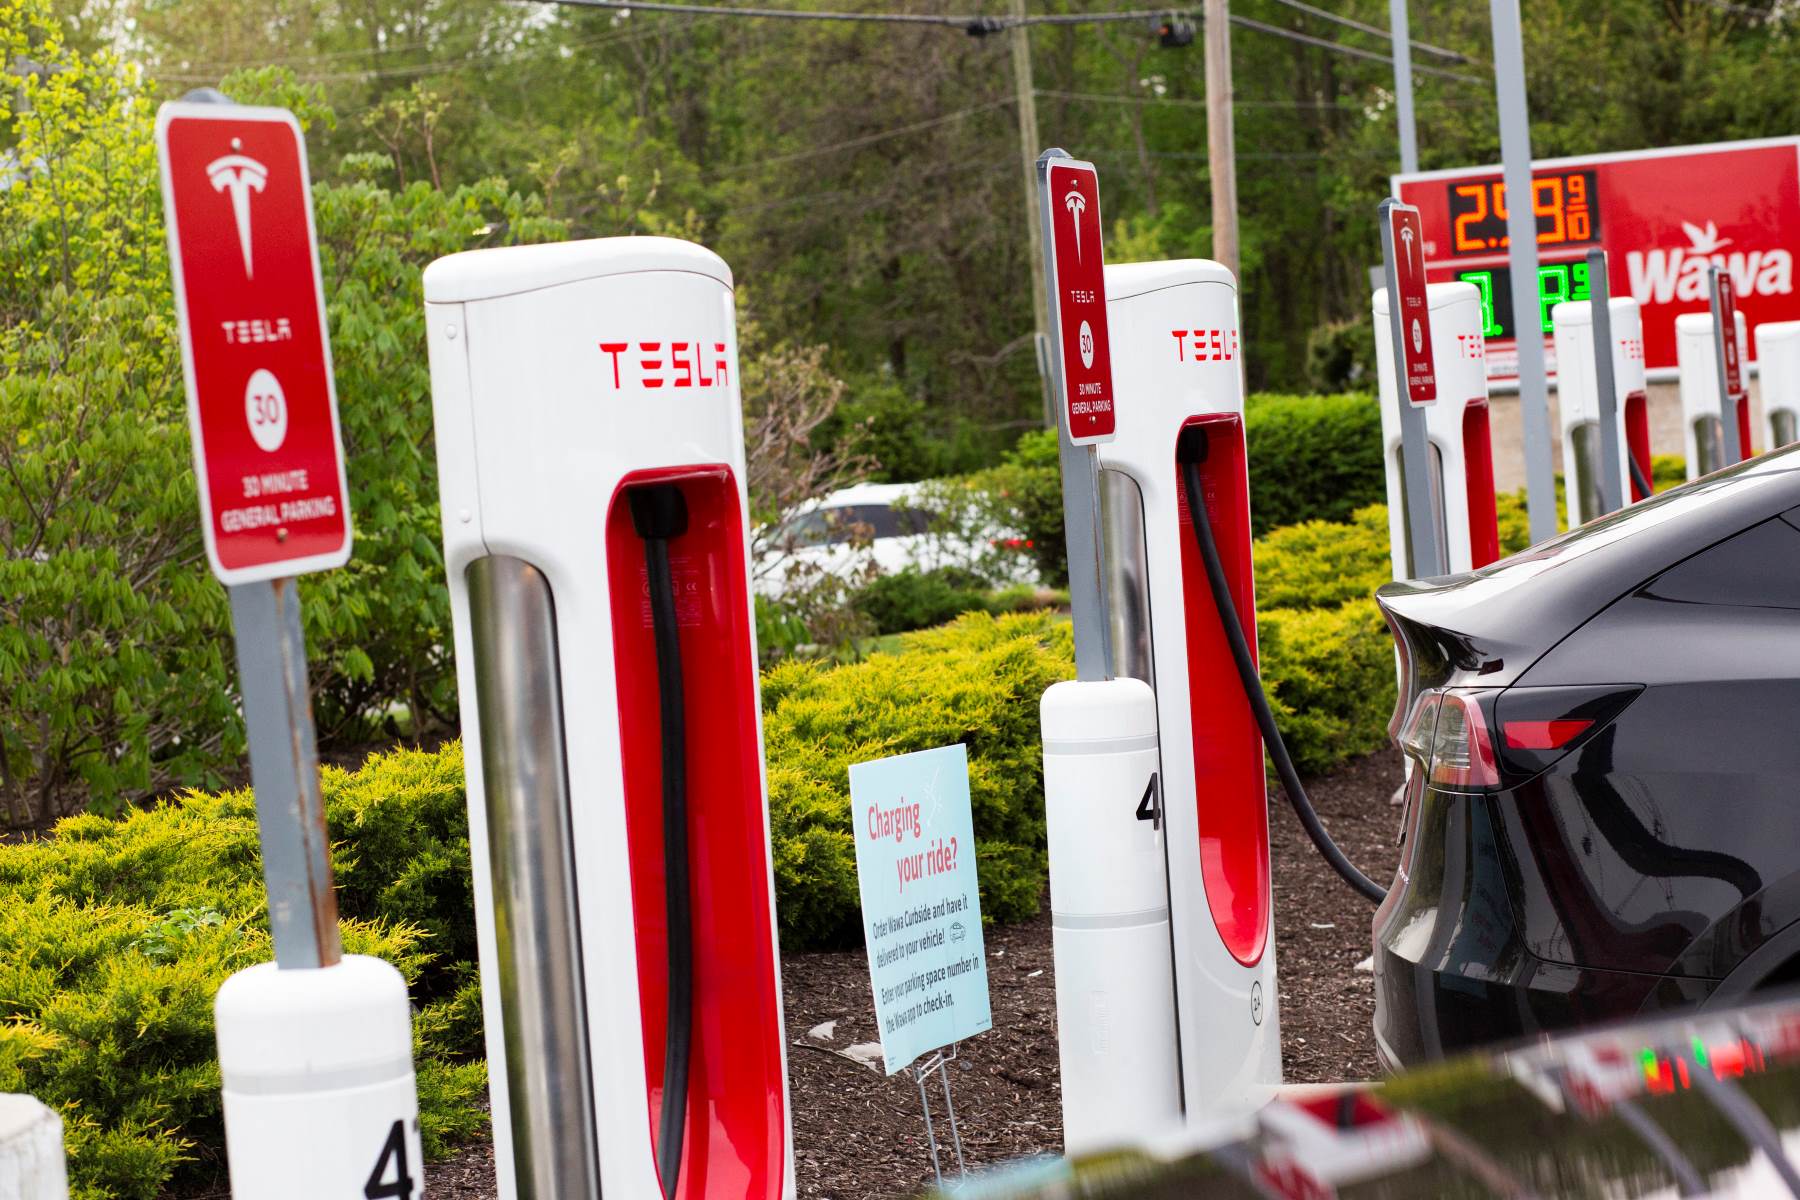 How To Find A Charging Station On Tesla